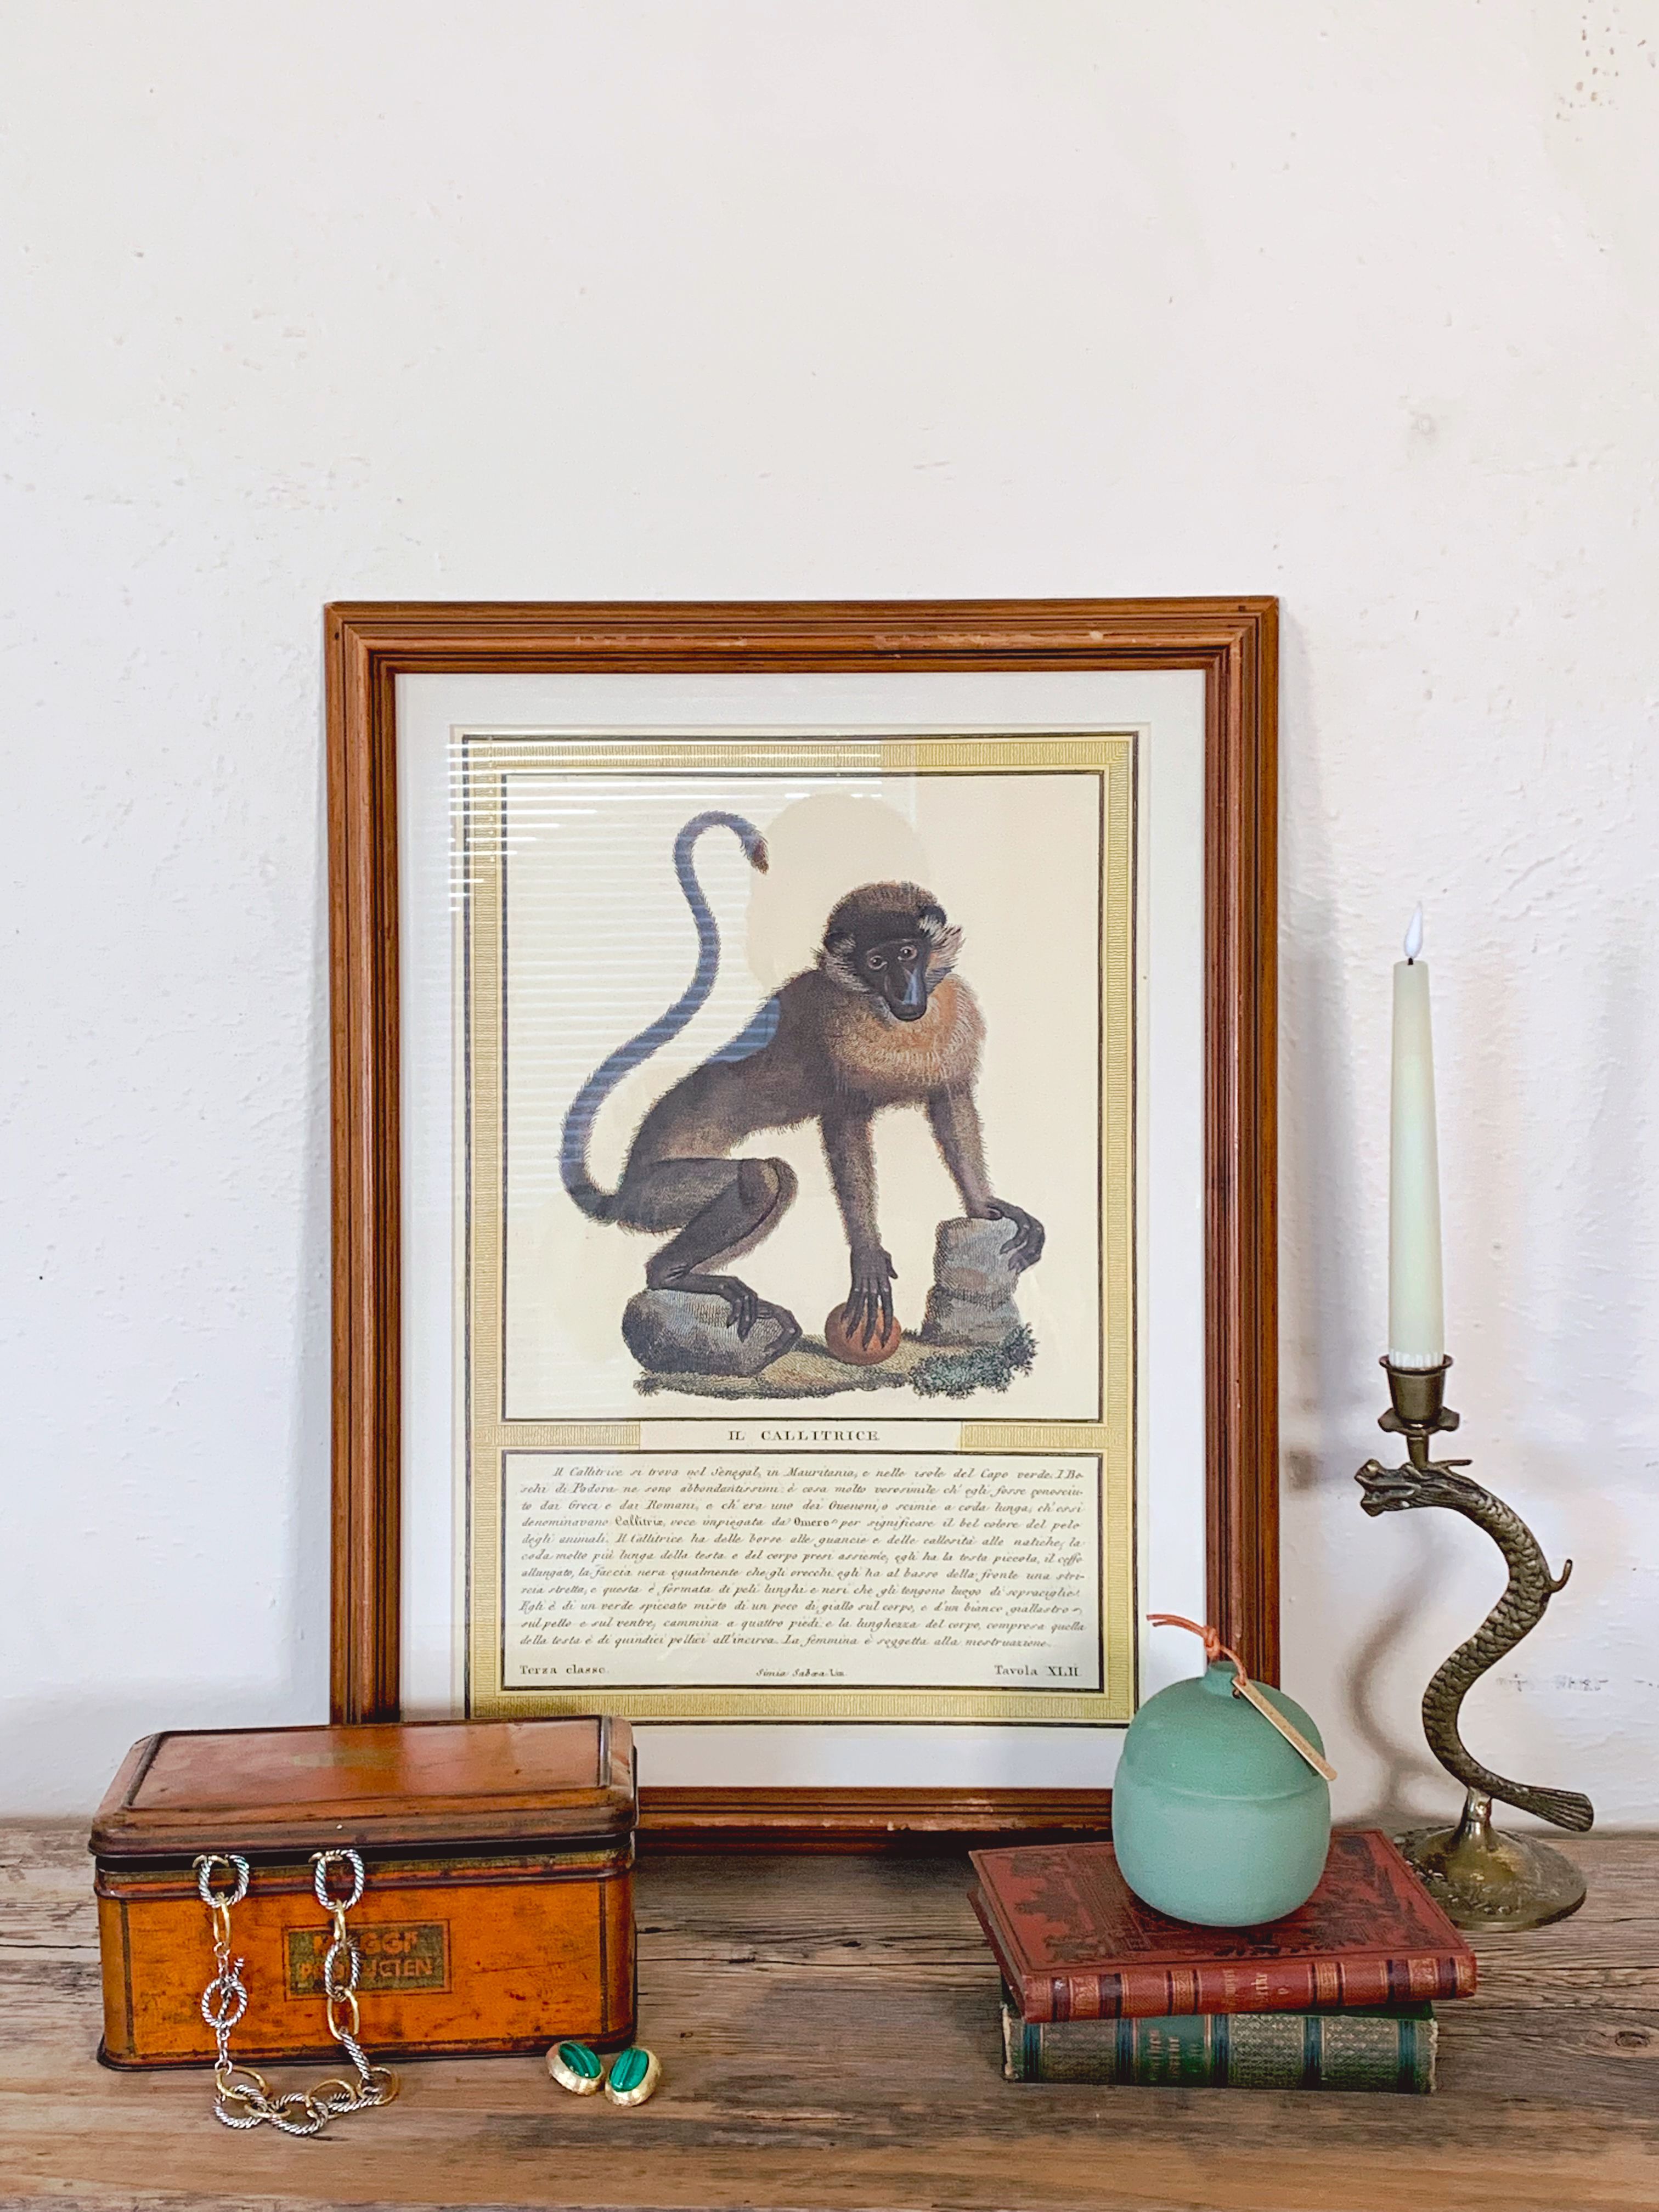 Italian Monkey Art Print in Vintage Frame from Natural History of Primates 1812 | IL. Callitrice | Wall Art | Playing Monkey | Vintage Natural History Print